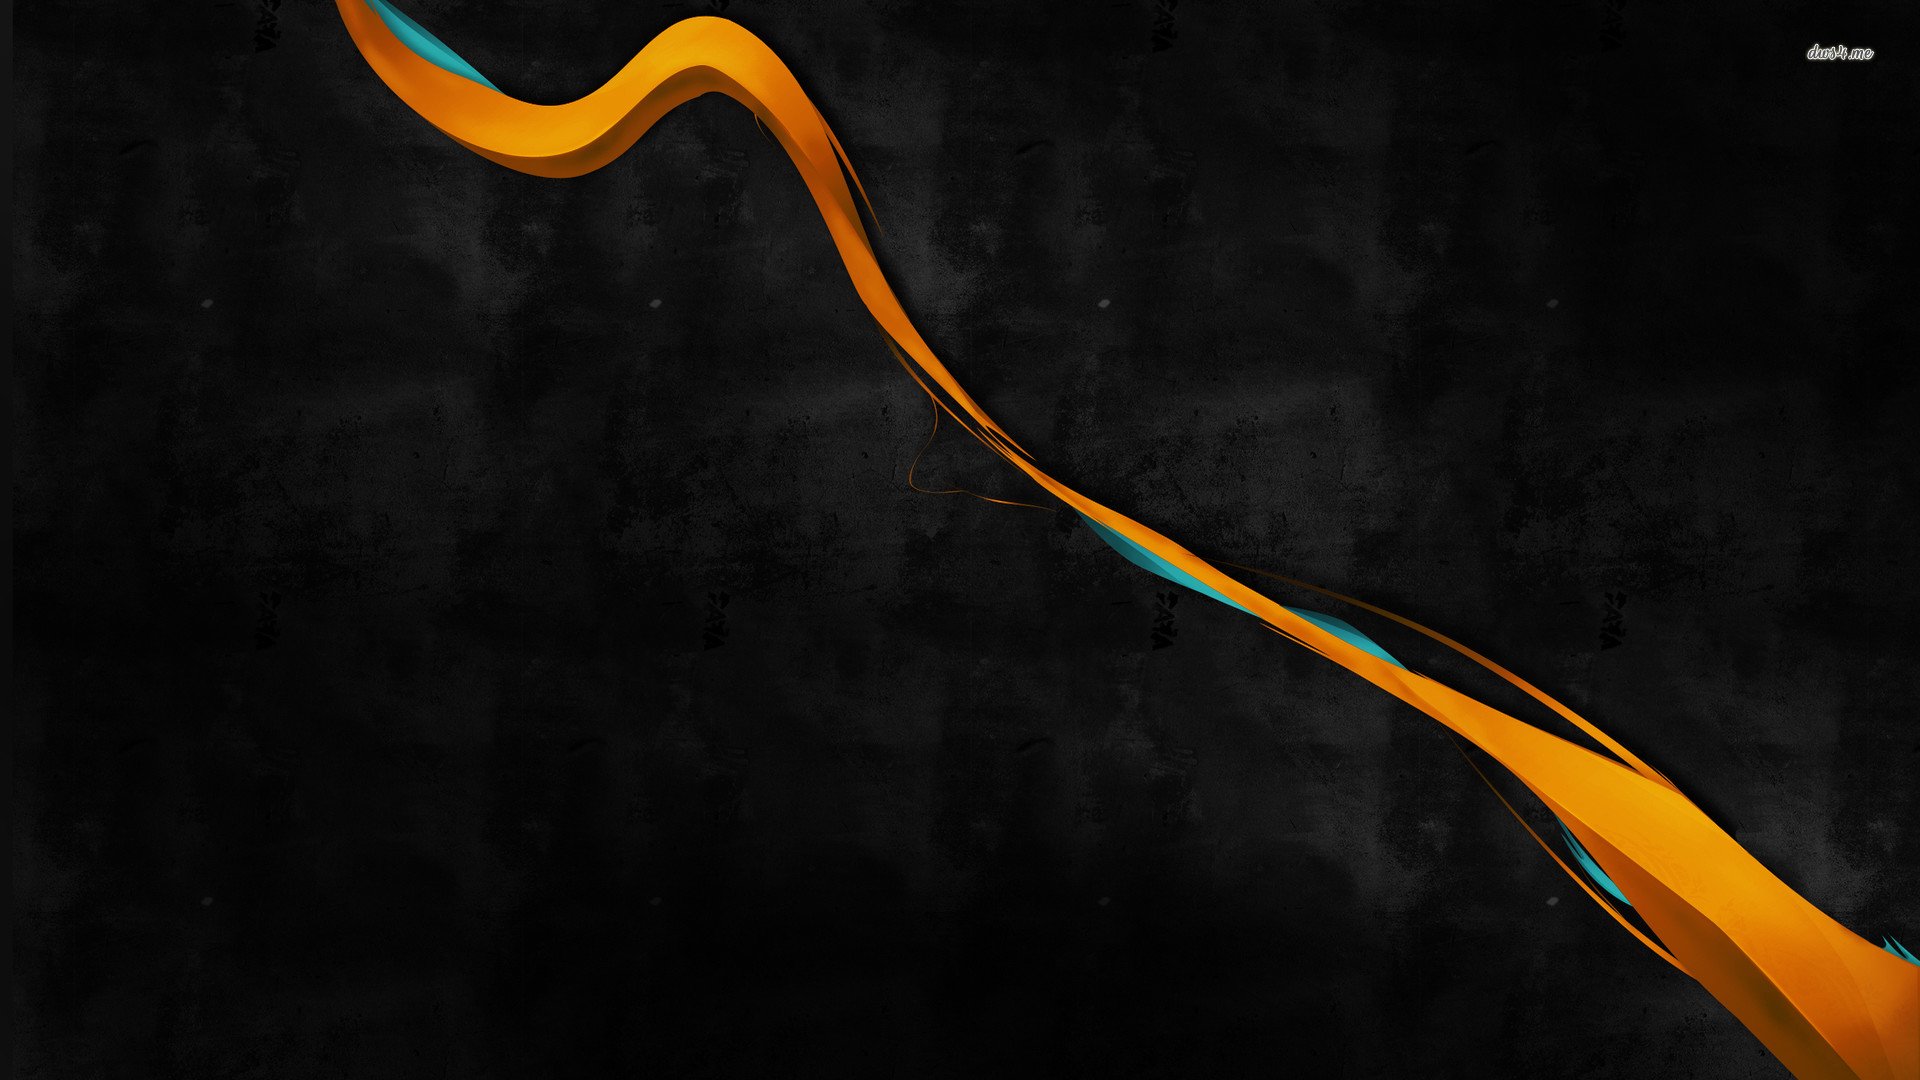 1920x1080 orange and black curved wallpaper #11570